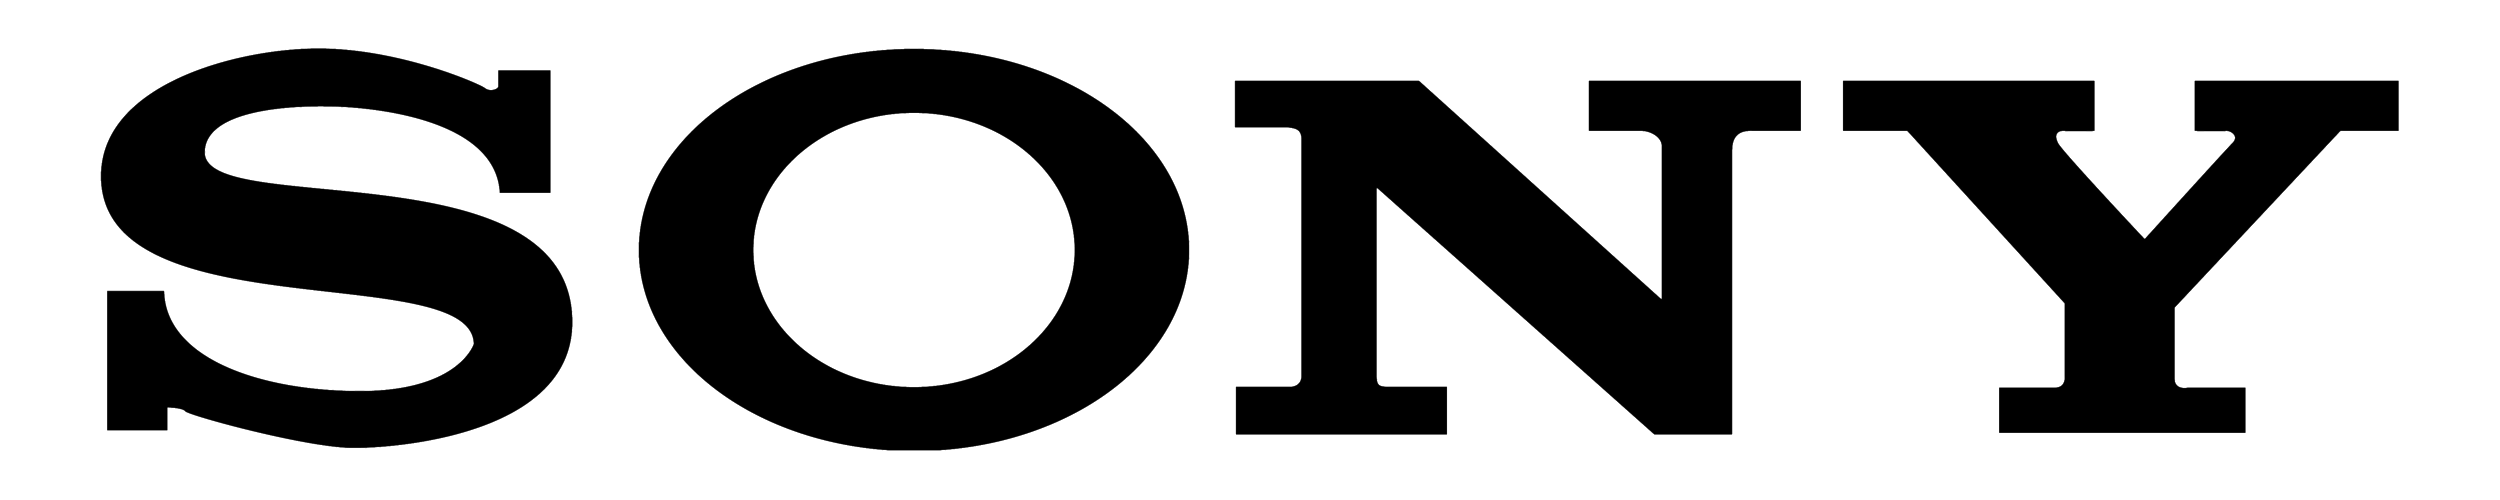 sony_logo_PNG2.png